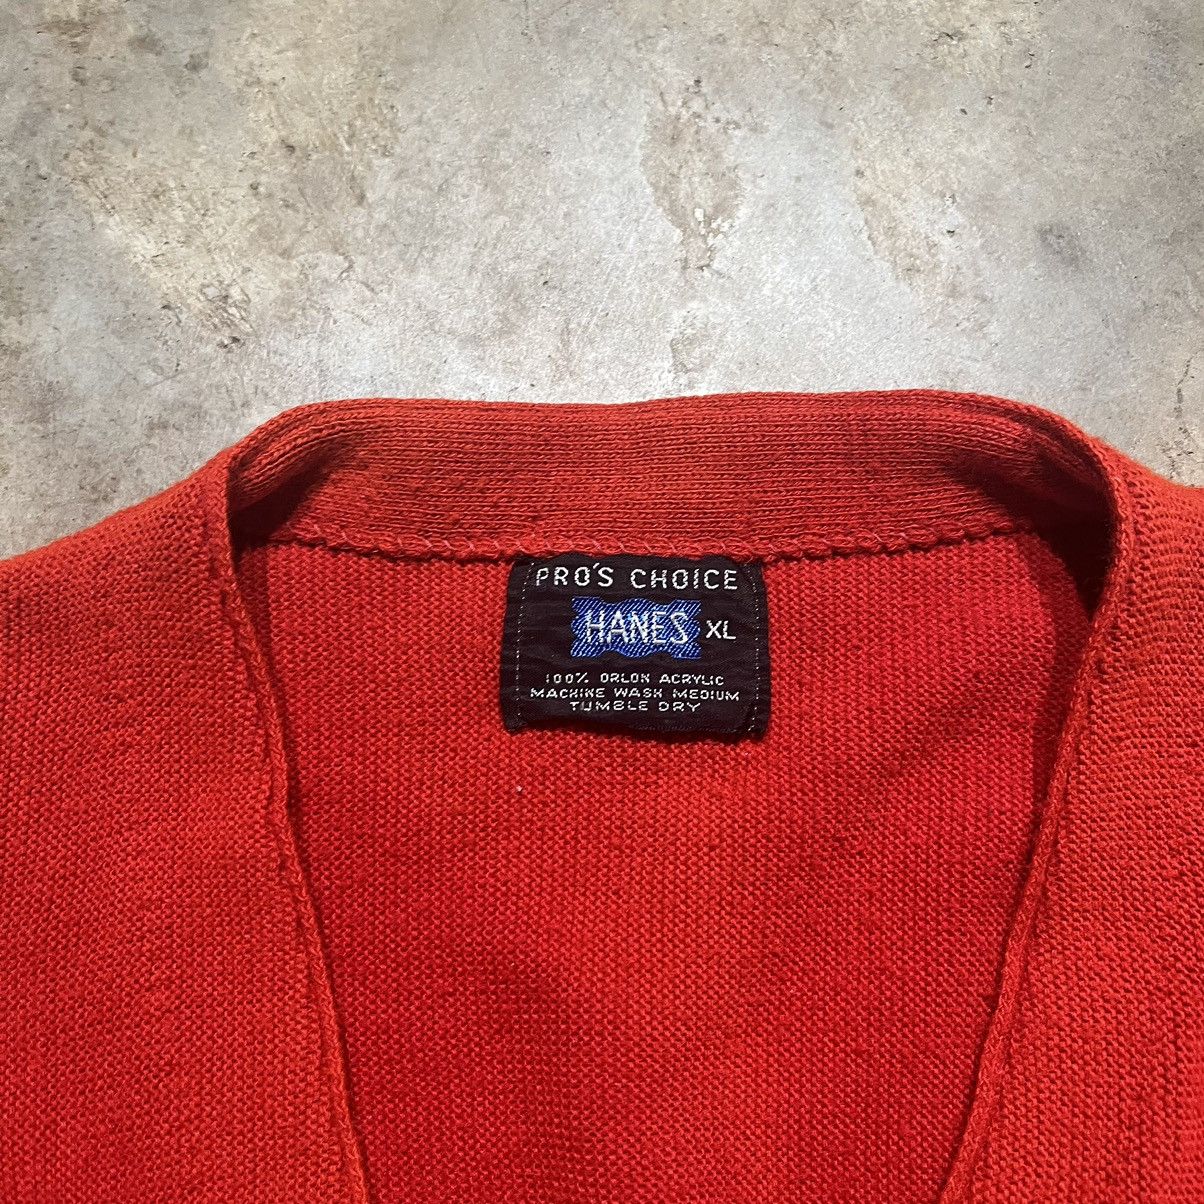 Vintage Vintage 70s Hanes Red Acrylic Faded Cardigan Size US L / EU 52-54 / 3 - 4 Preview